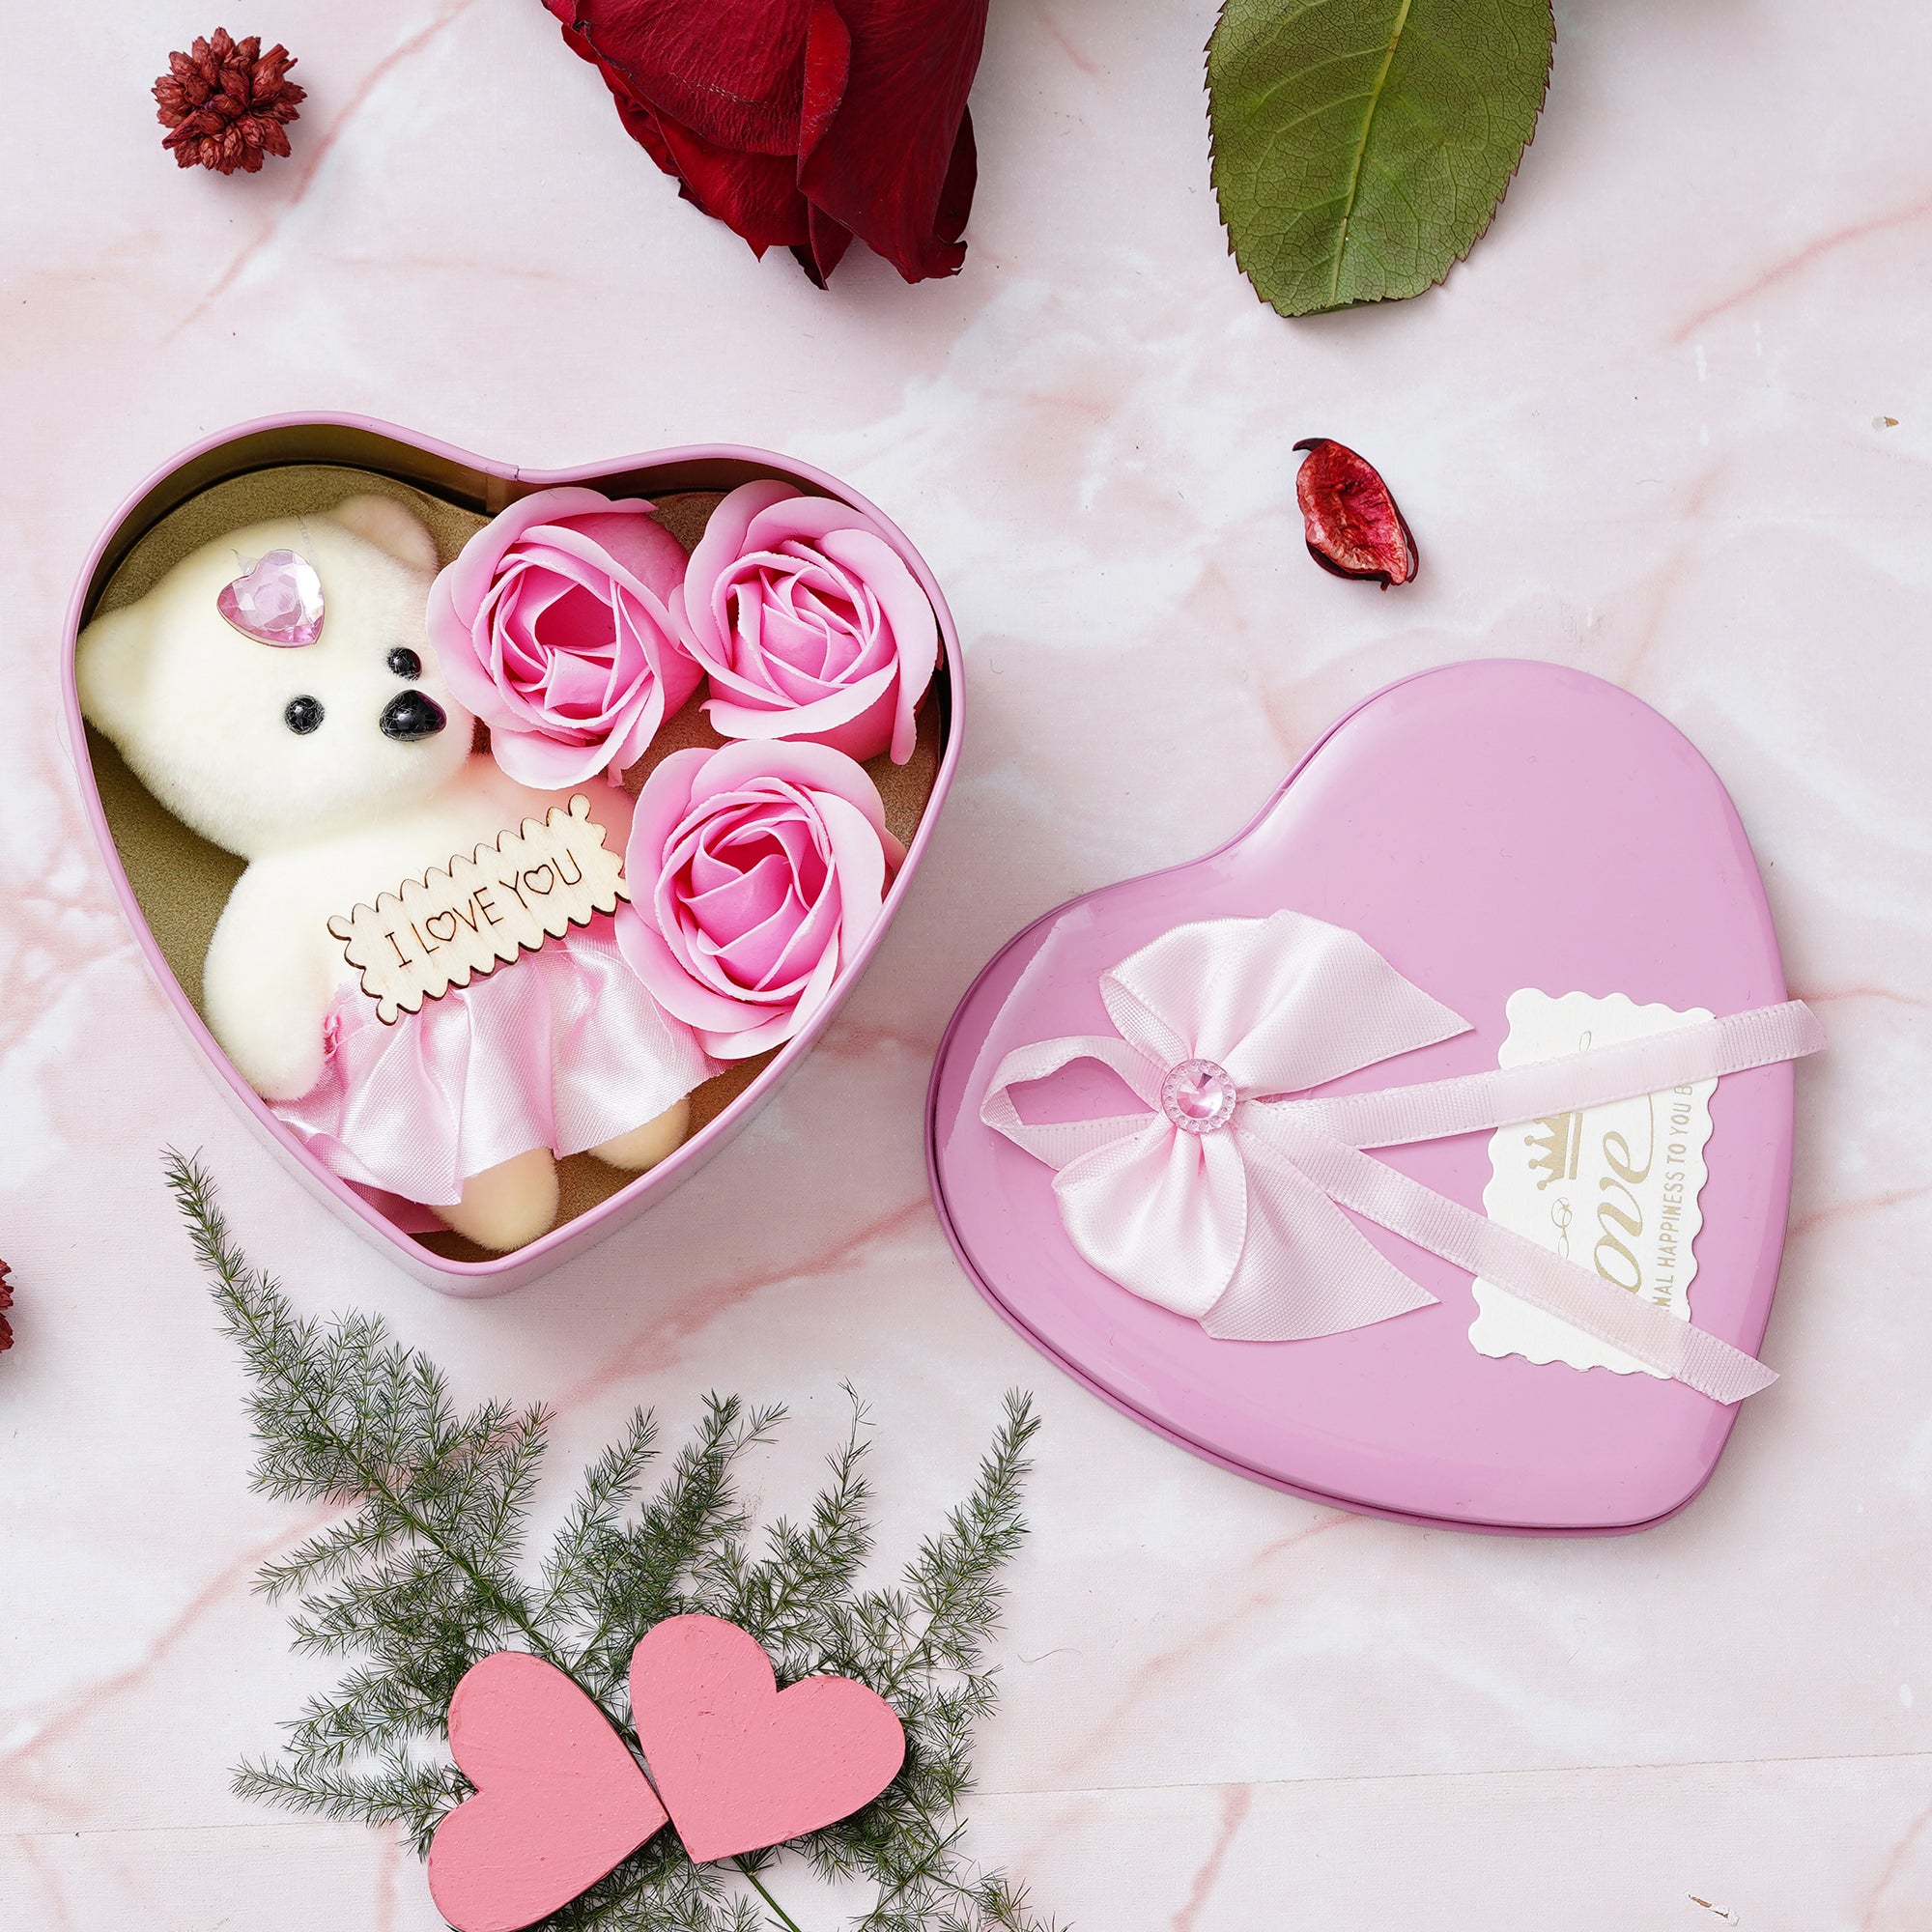 Valentine Combo of Love Golden Red Rose Table Decor Gift Set Showpiece, Pink Heart Shaped Gift Box with Teddy and Roses 3